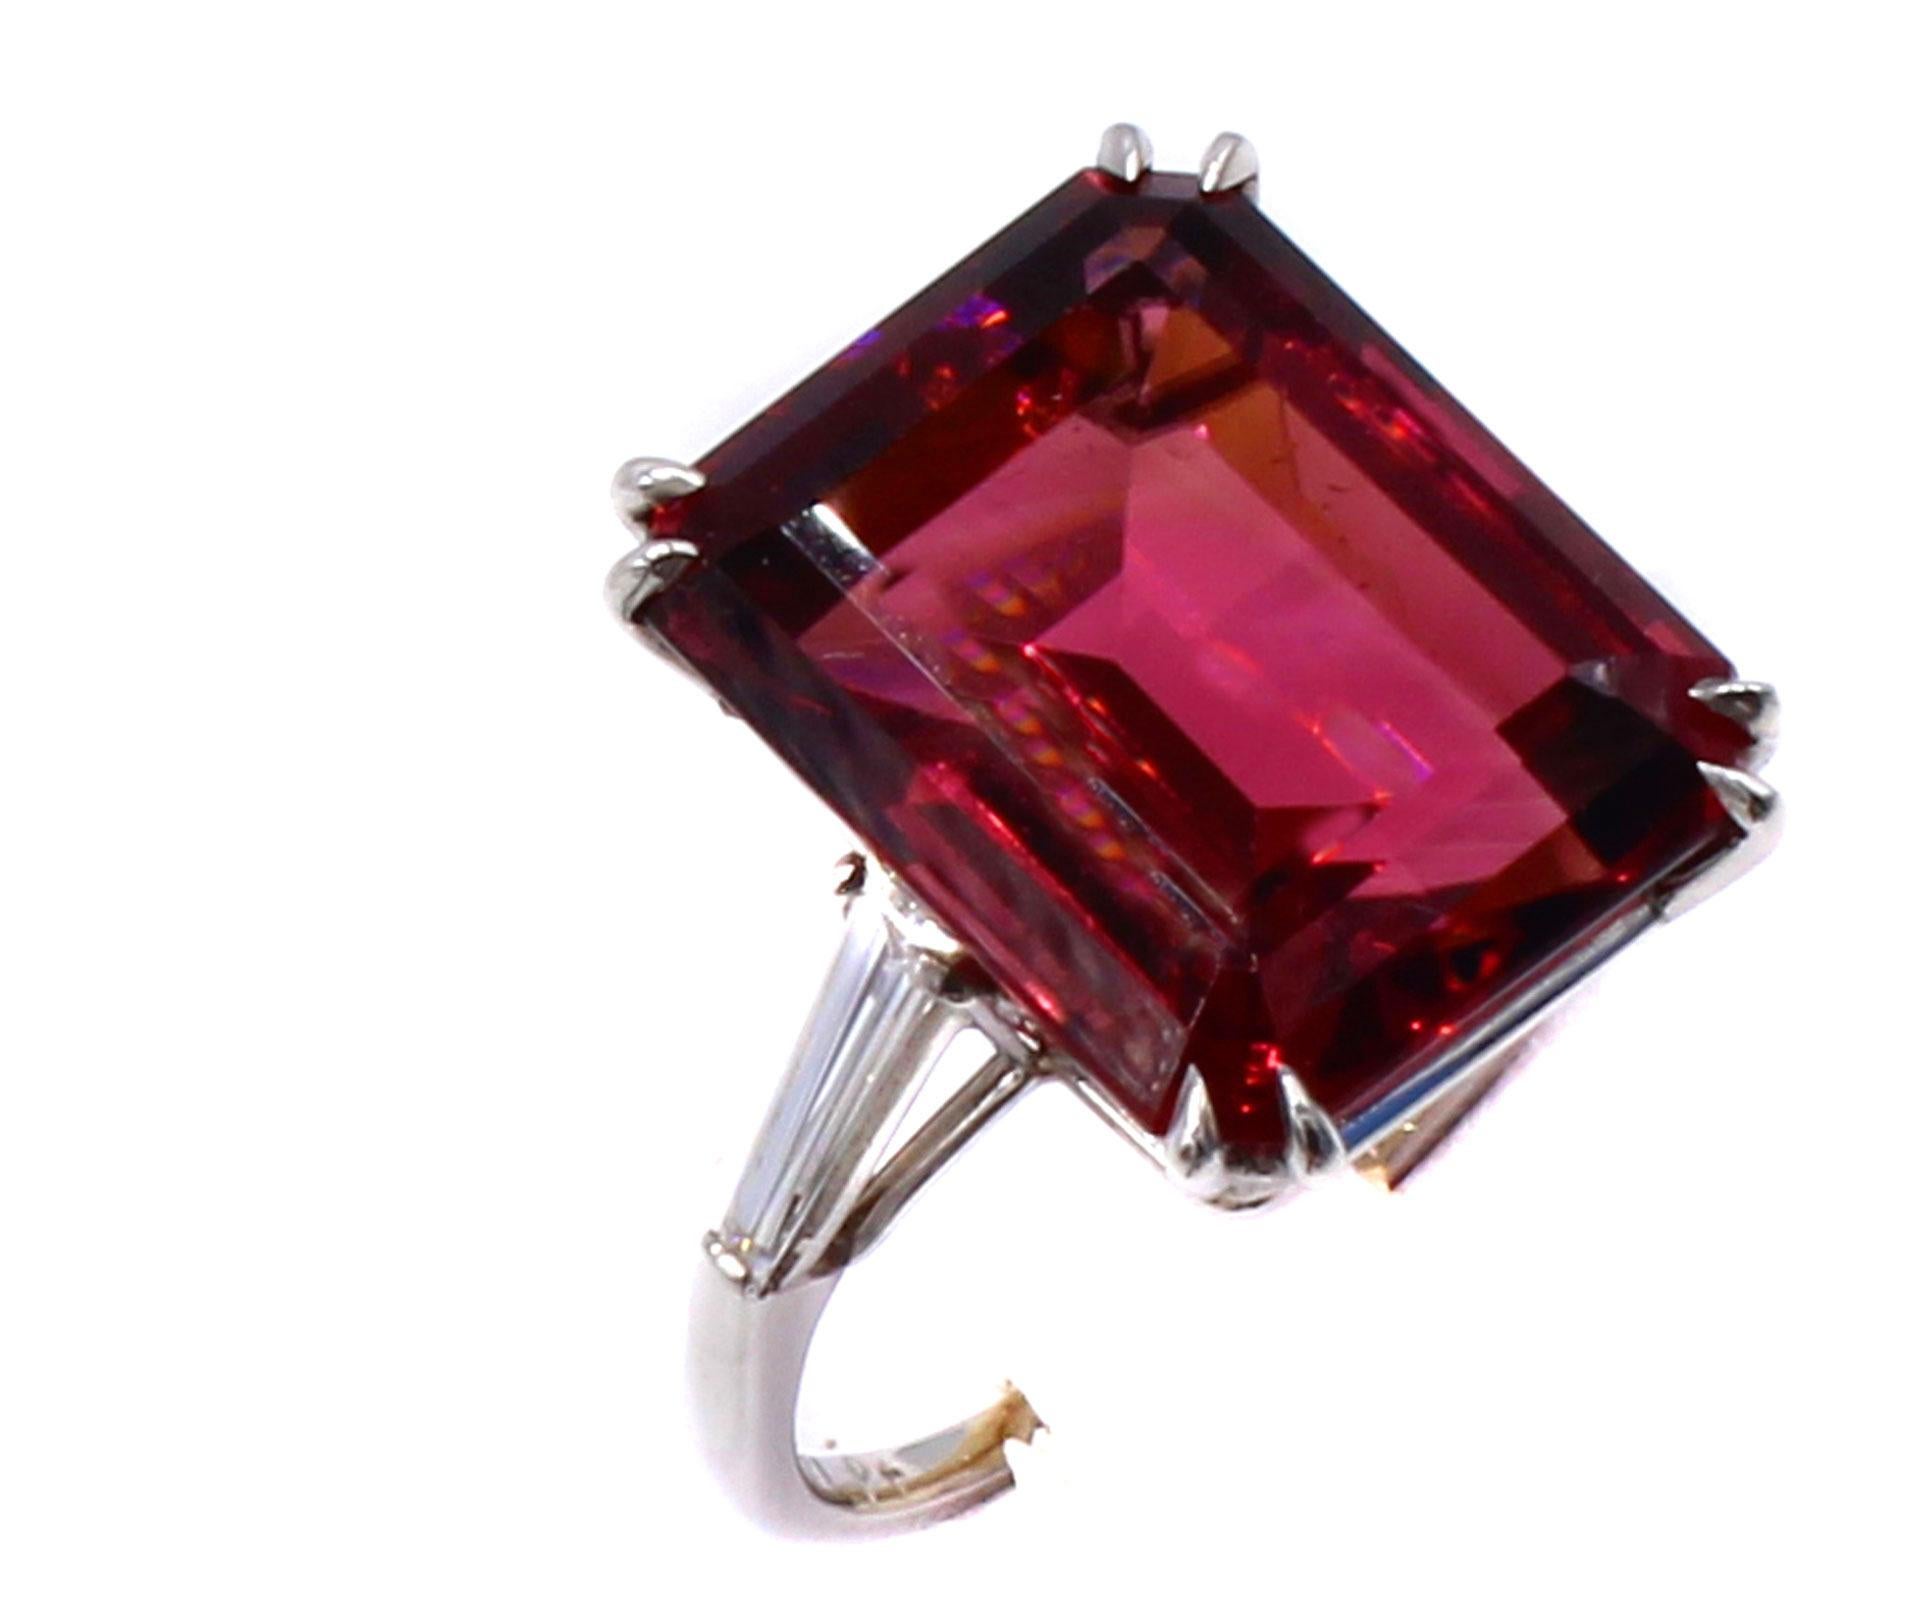 



A perfectly proportioned gem Rubellite step-cut, weighing 13.77 carats is the center piece of this hand-crafted chic and bold platinum ring. Securely held by 2 fine eagle-claw prongs on each corner and set into a basket of 2 spaced wires, this